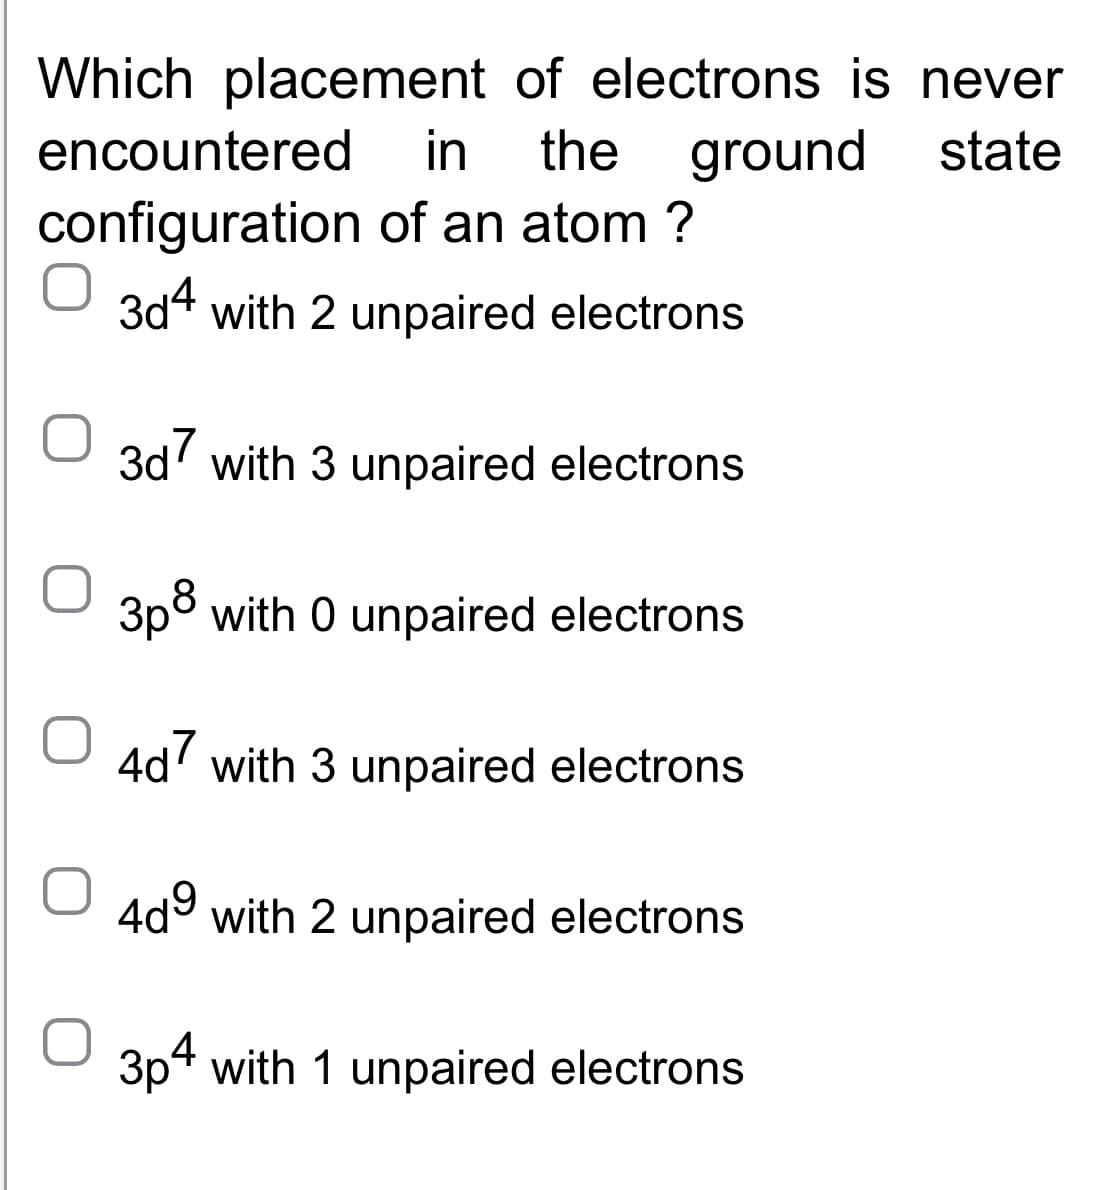 of electrons is never
the ground state
of an atom ?
in
Which placement
encountered
configuration
3d4 with 2 unpaired electrons
3d7 with 3 unpaired electrons
3p³ with 0 unpaired electrons
O4d7 with 3 unpaired electrons
4d⁹ with 2 unpaired electrons
3p4 with 1 unpaired electrons